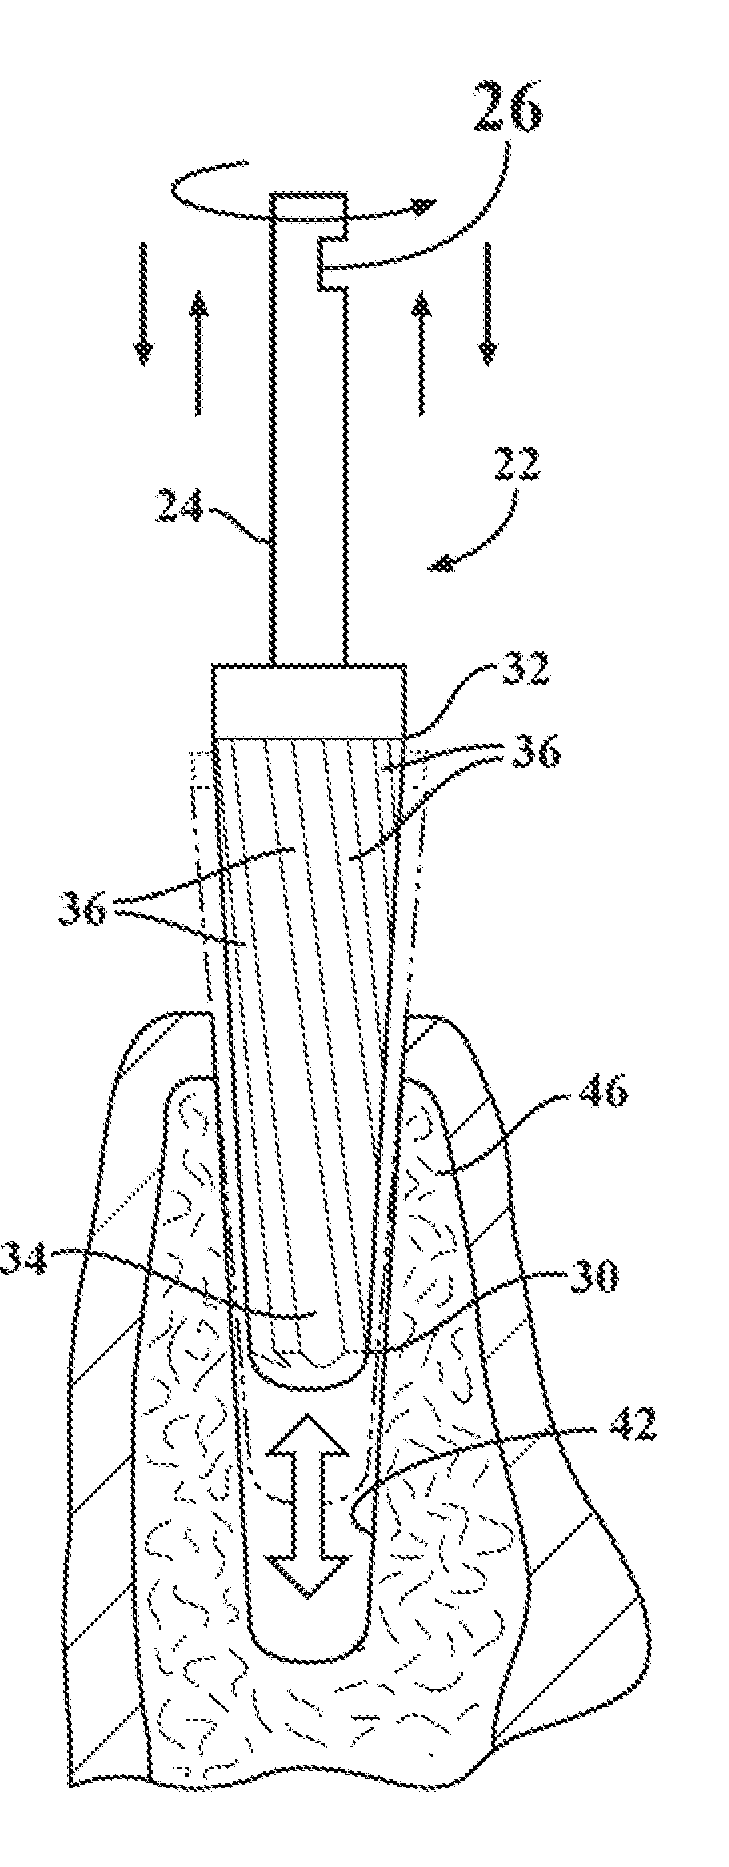 Fluted osteotome and surgical method for use